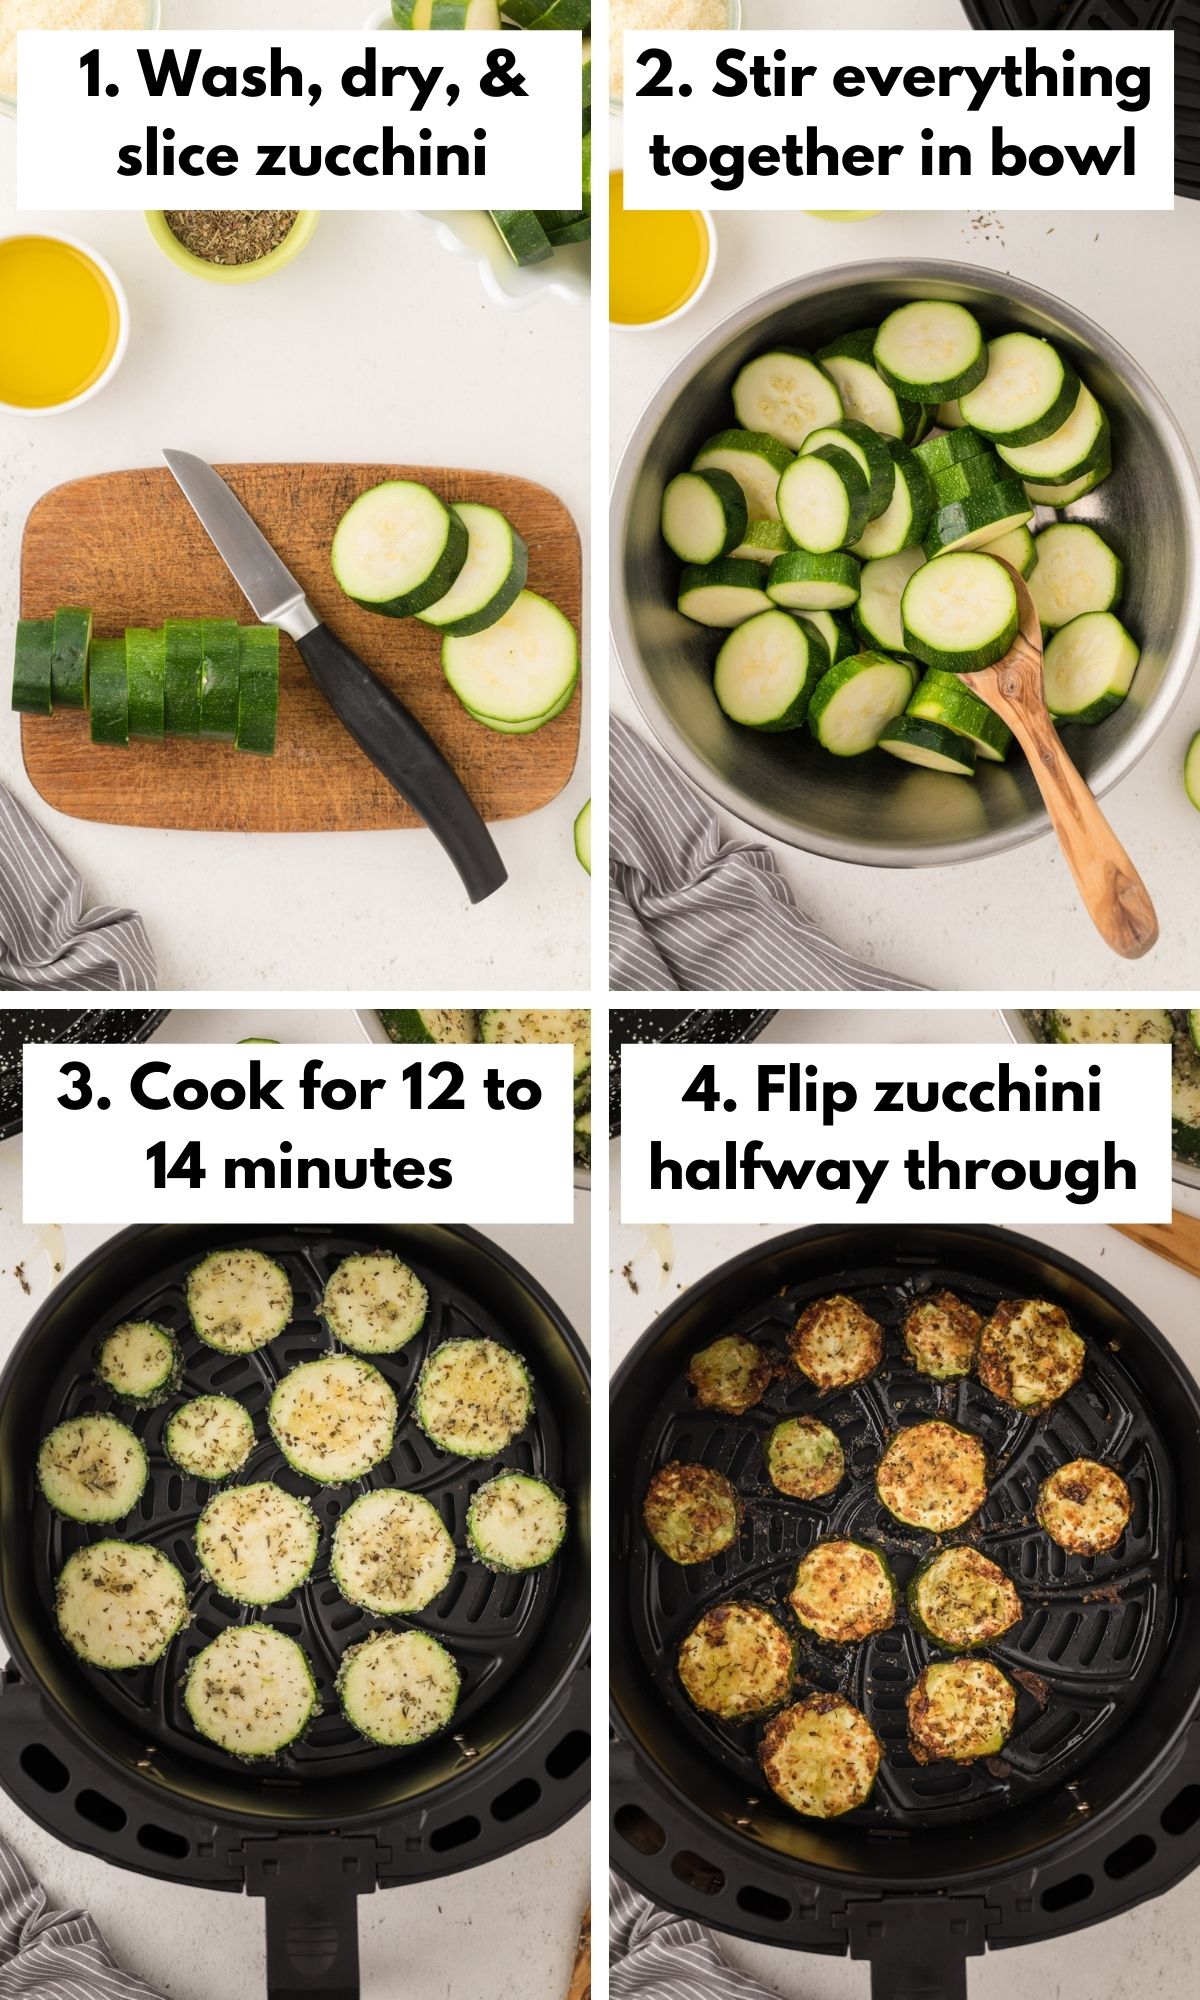 How to make zucchini chips in the air fryer